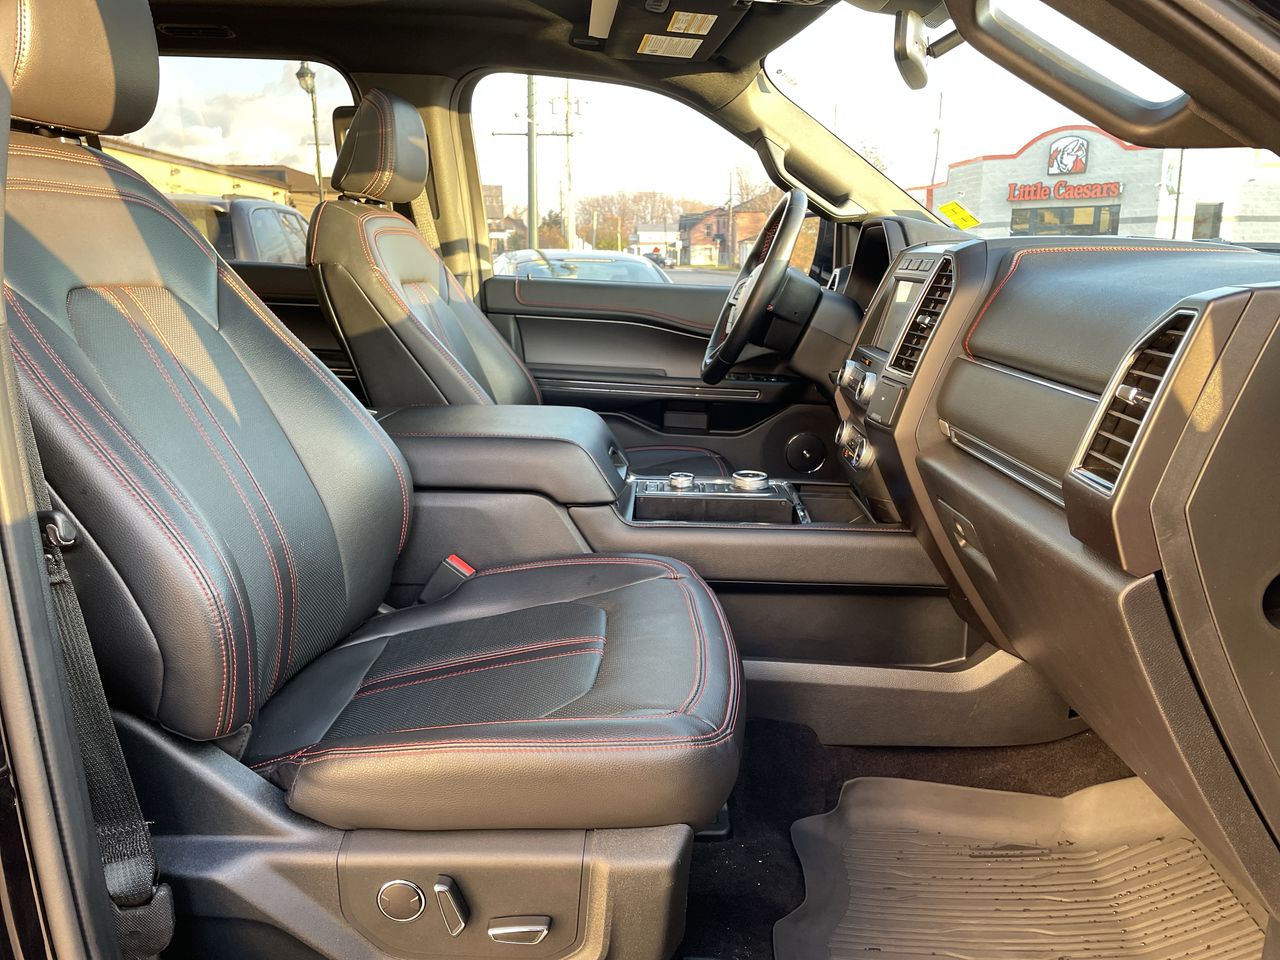 2021 Ford Expedition - 21452B Full Image 27